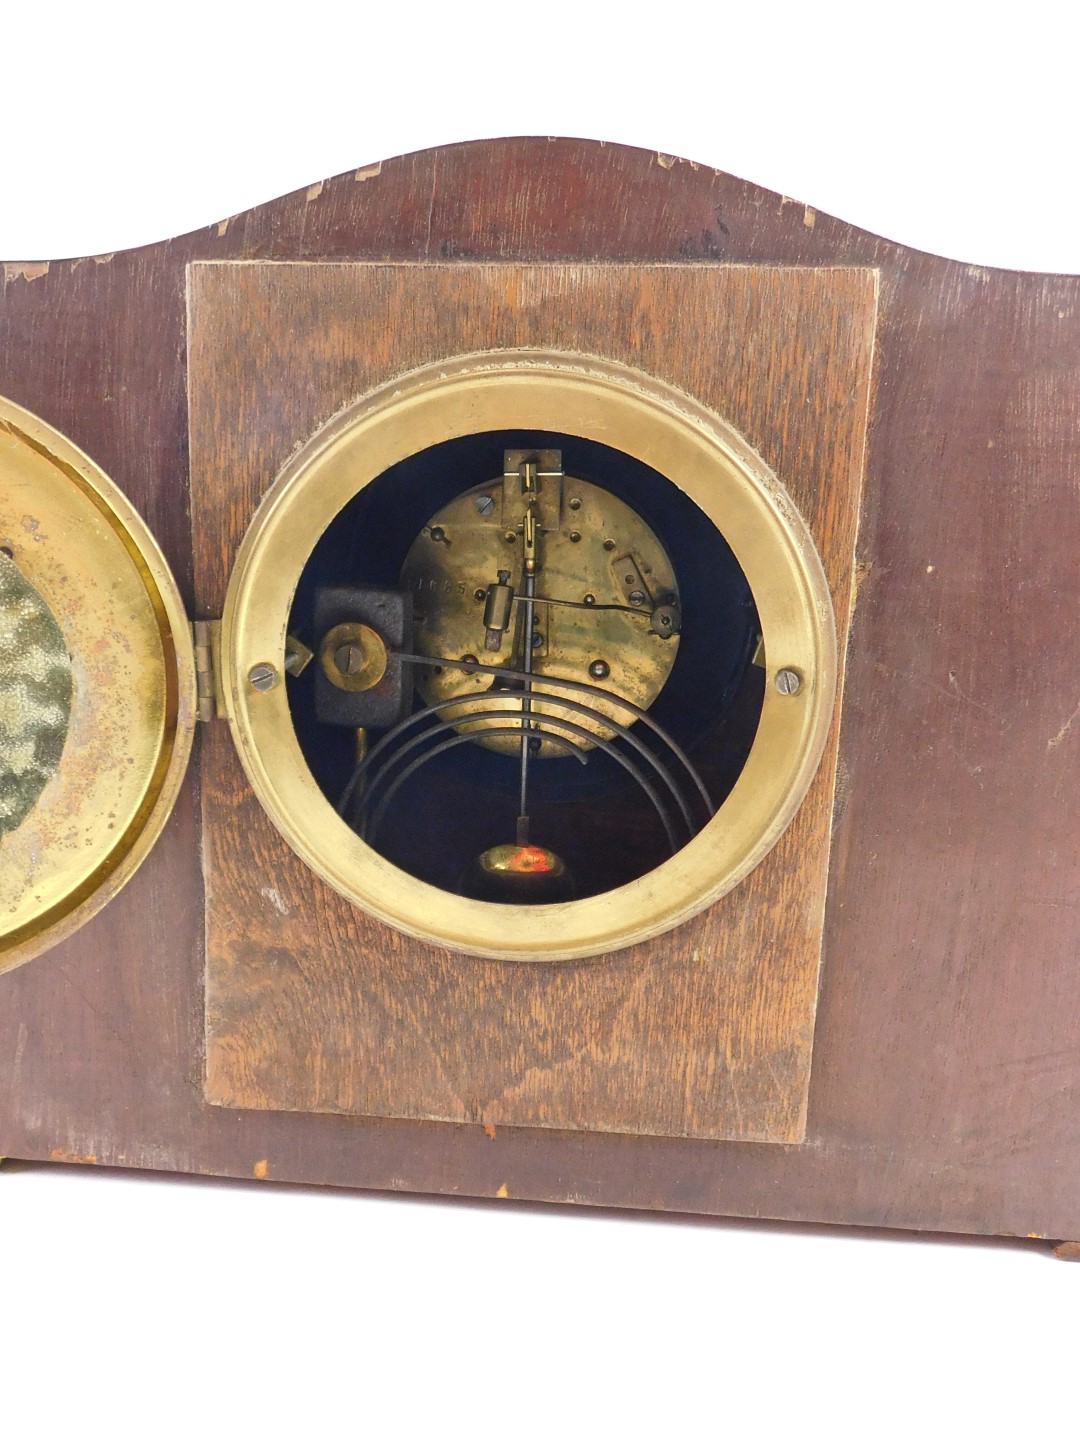 An Edwardian mahogany and chequer banded mantel clock, with a shaped top, silvered dial, on a plinth - Image 3 of 3